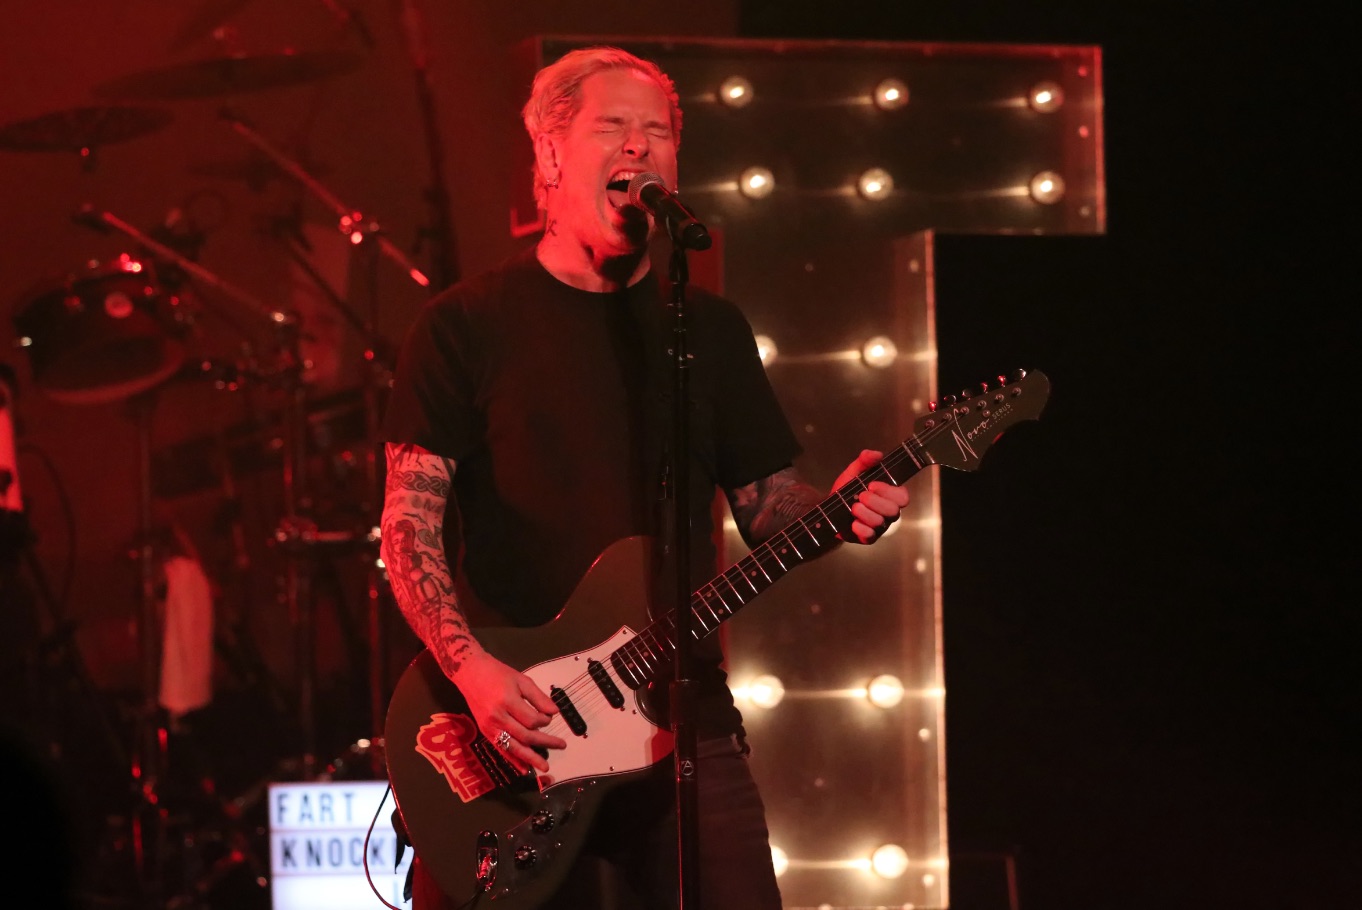 Concert Review: Live Music Has Returned With A One Two Punch And Corey Taylor Delivers It At The Forge